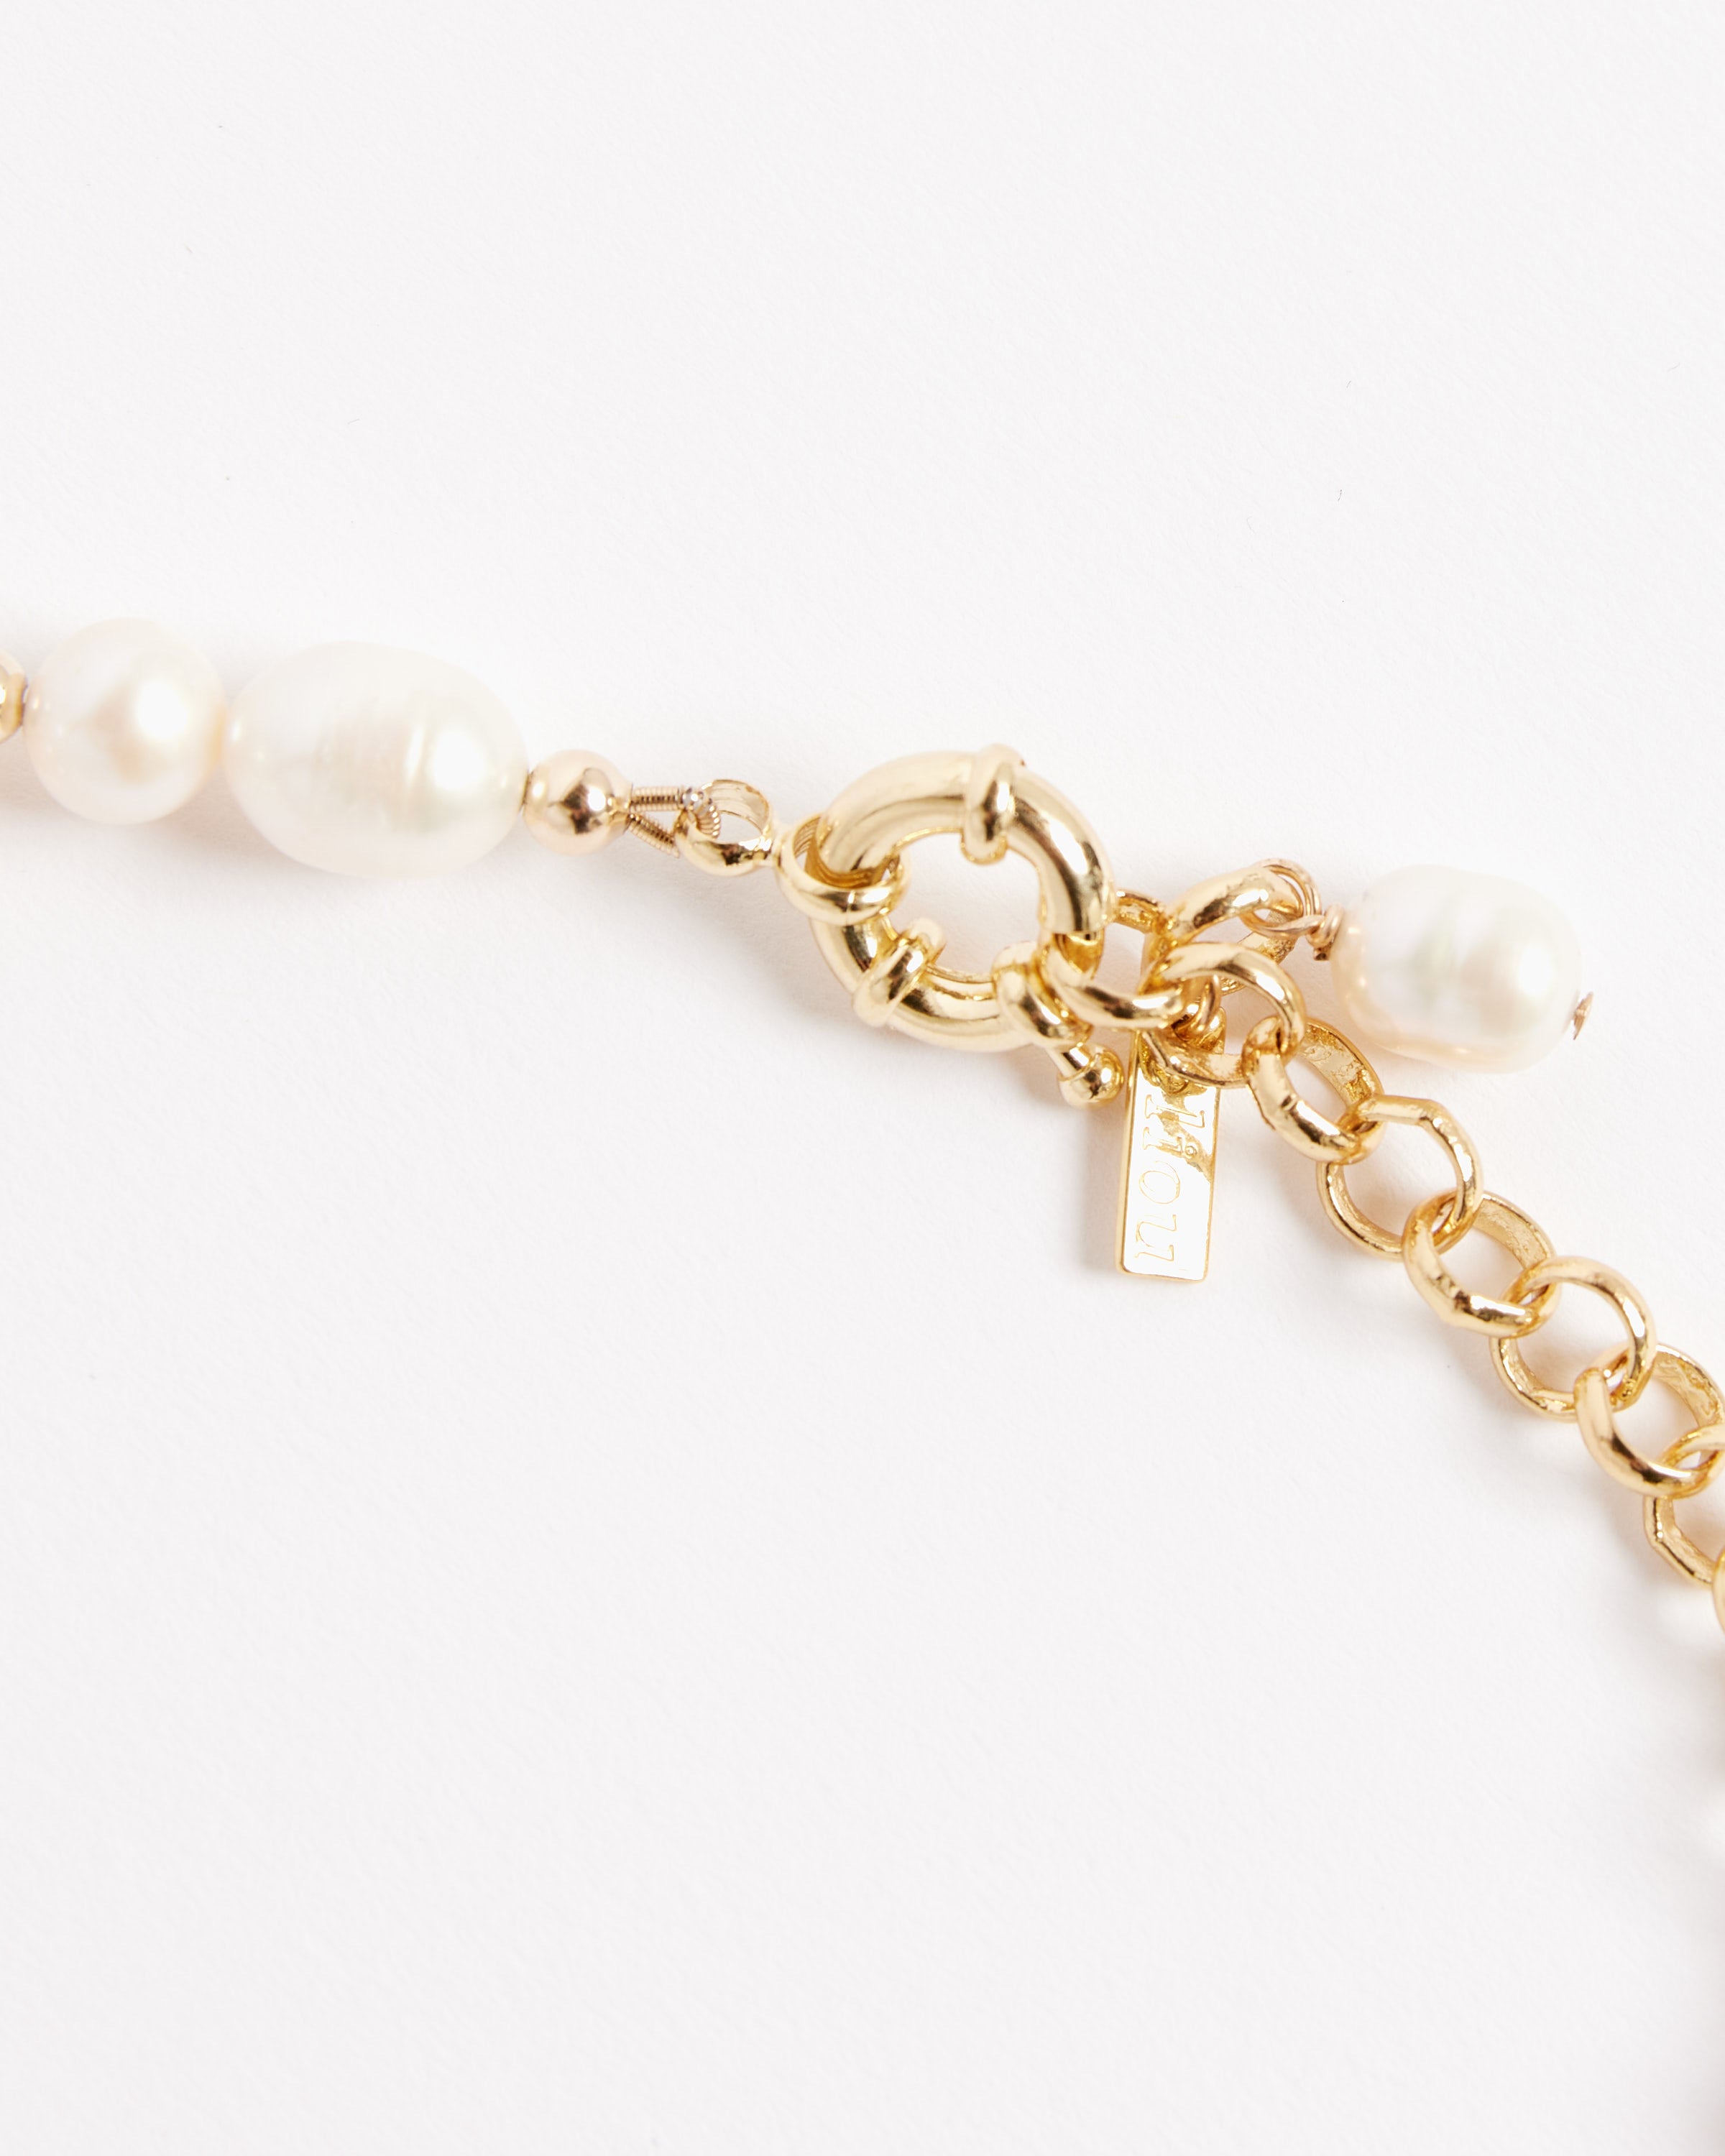 Kaia Necklace in Pearl/Gold